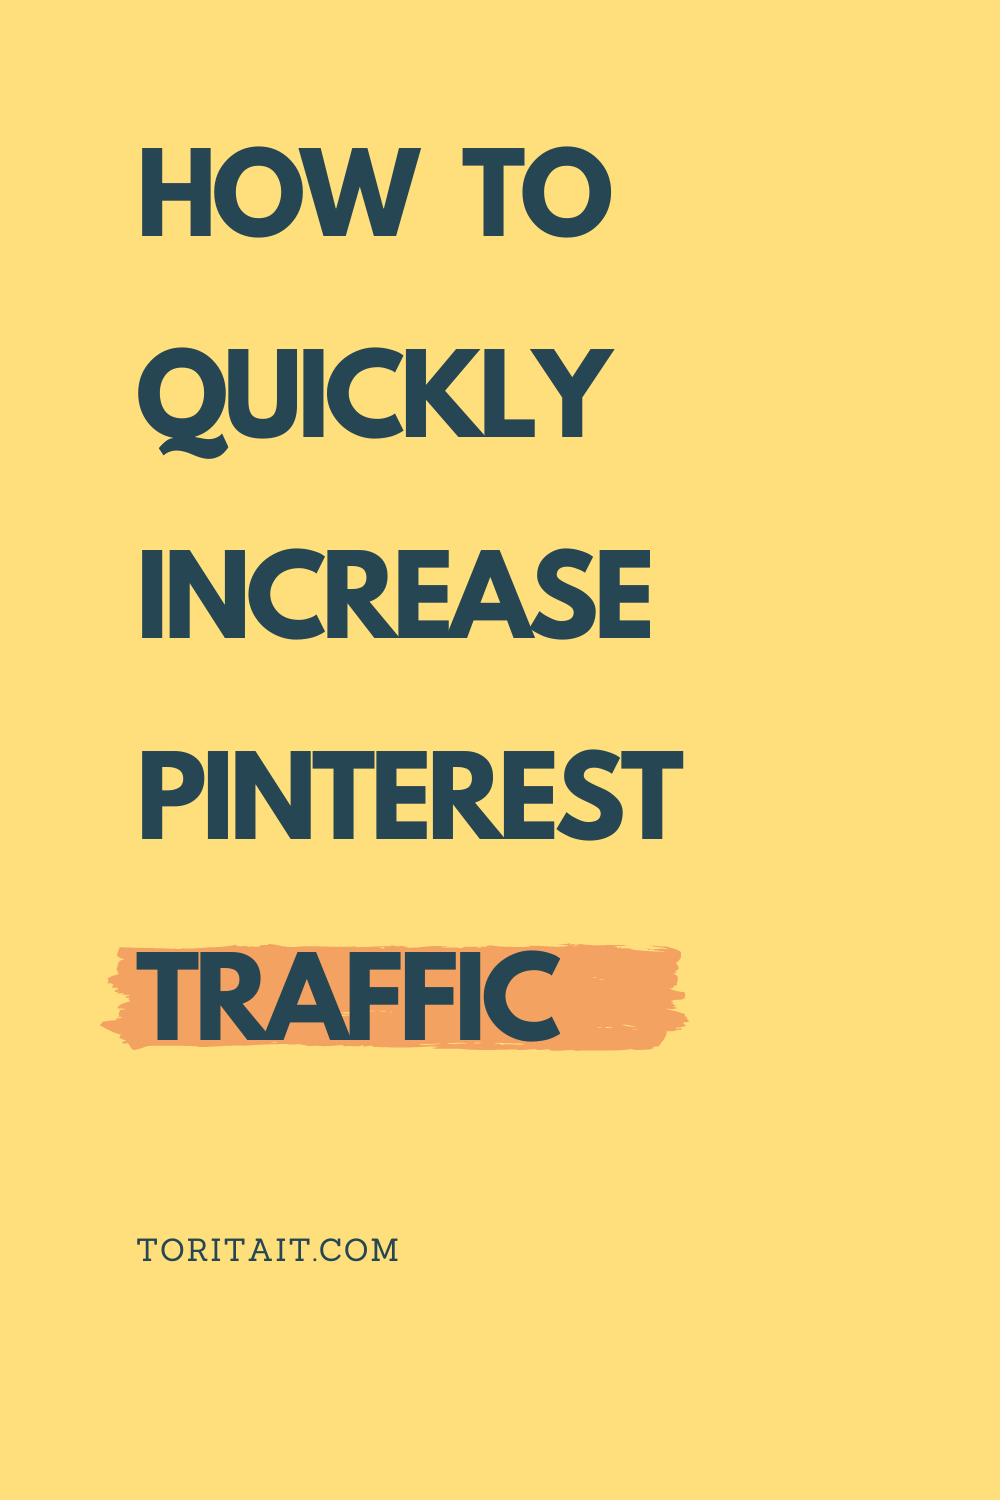 4 Ways To Quickly Increase Pinterest Traffic